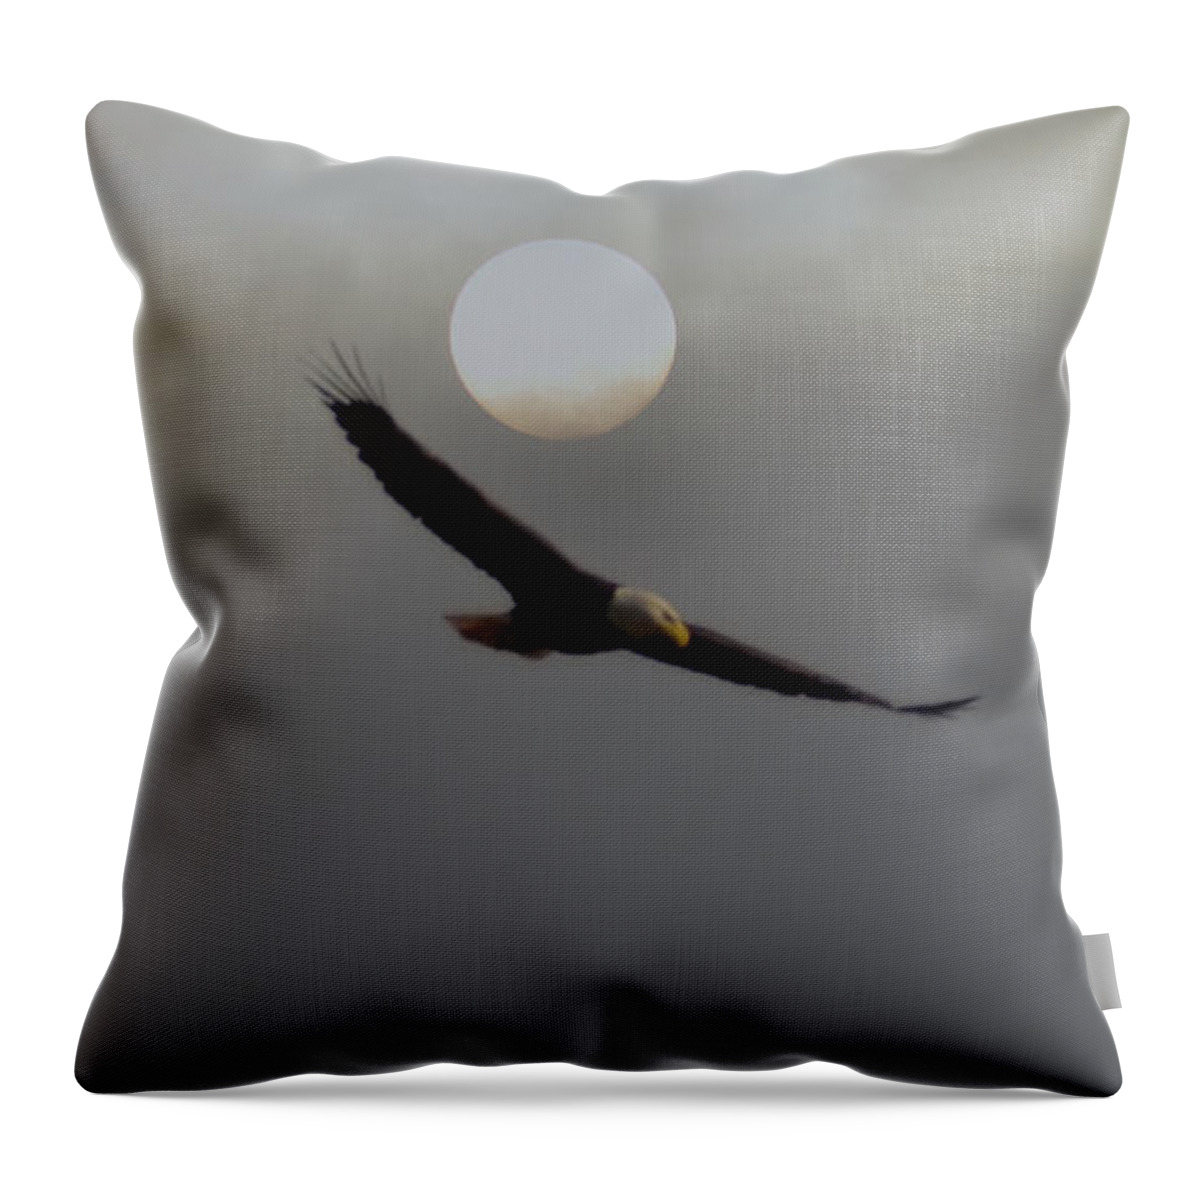 The Eagle Flies At Dawn Throw Pillow featuring the photograph The Eagle Flies at Dawn by Bill Cannon